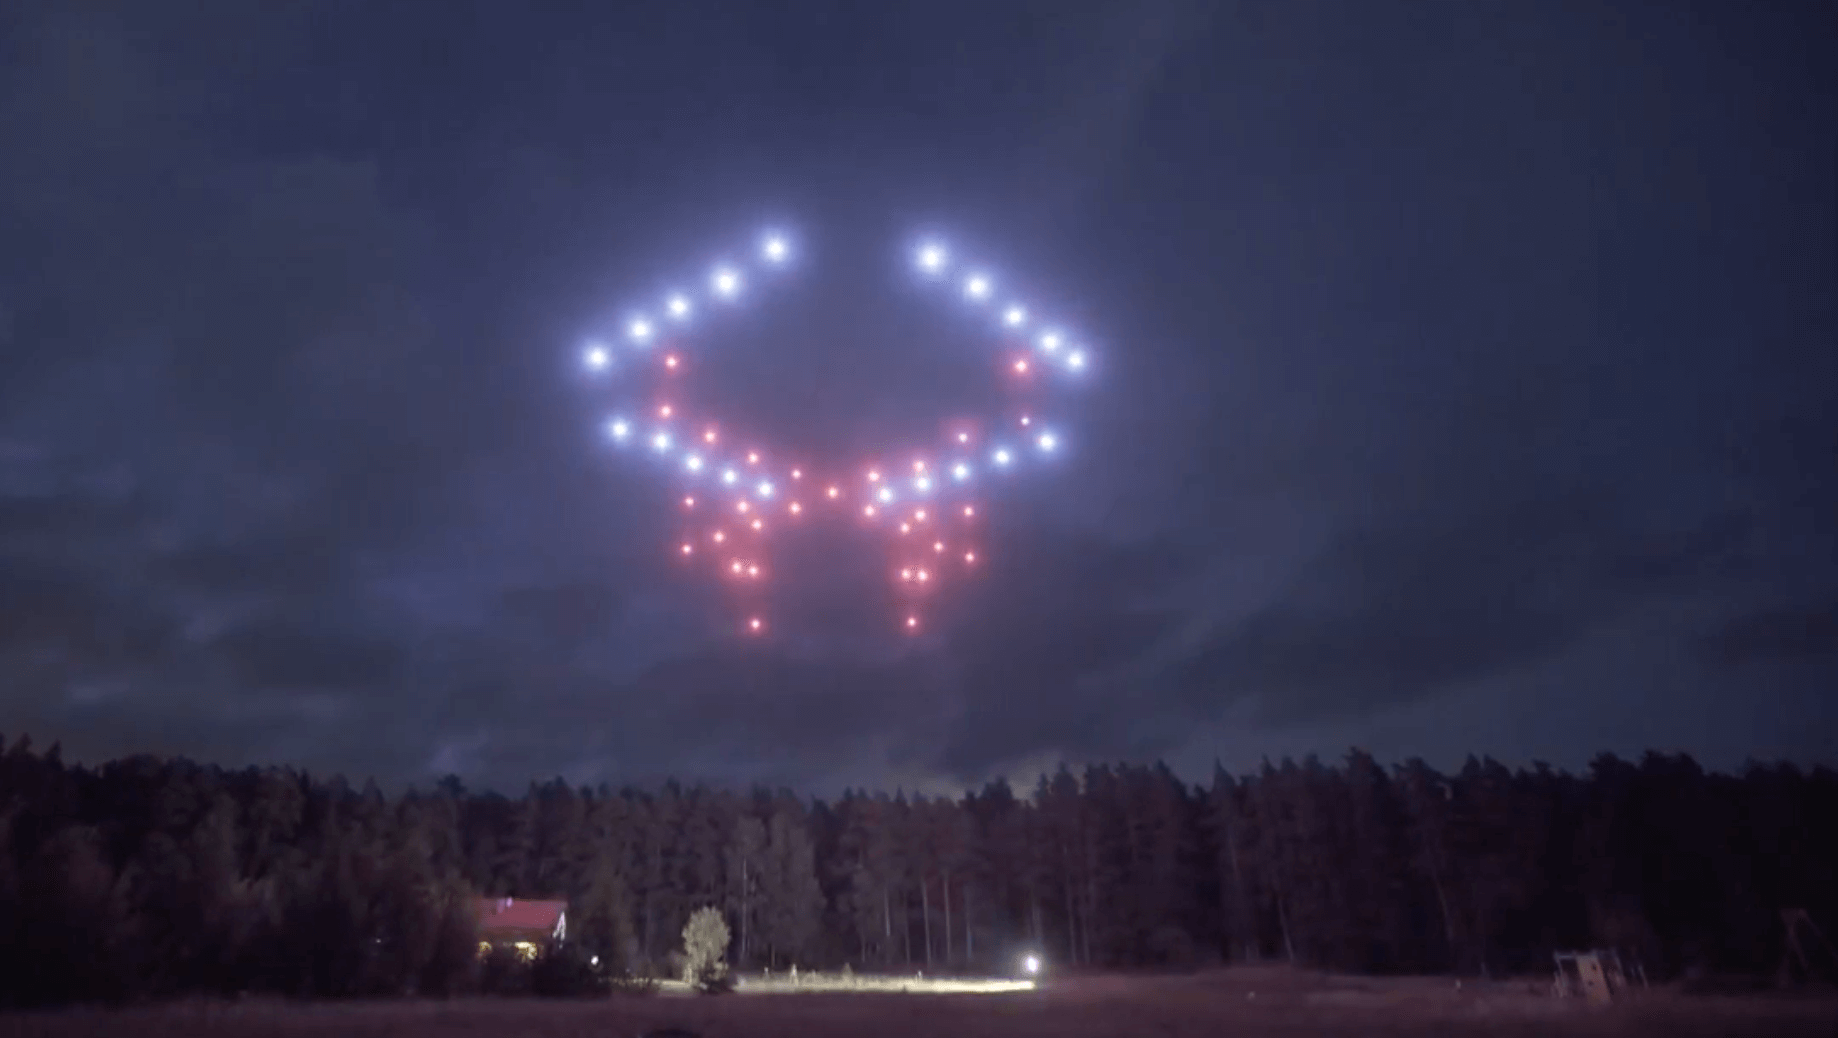 Choreographed Drone Performances for events